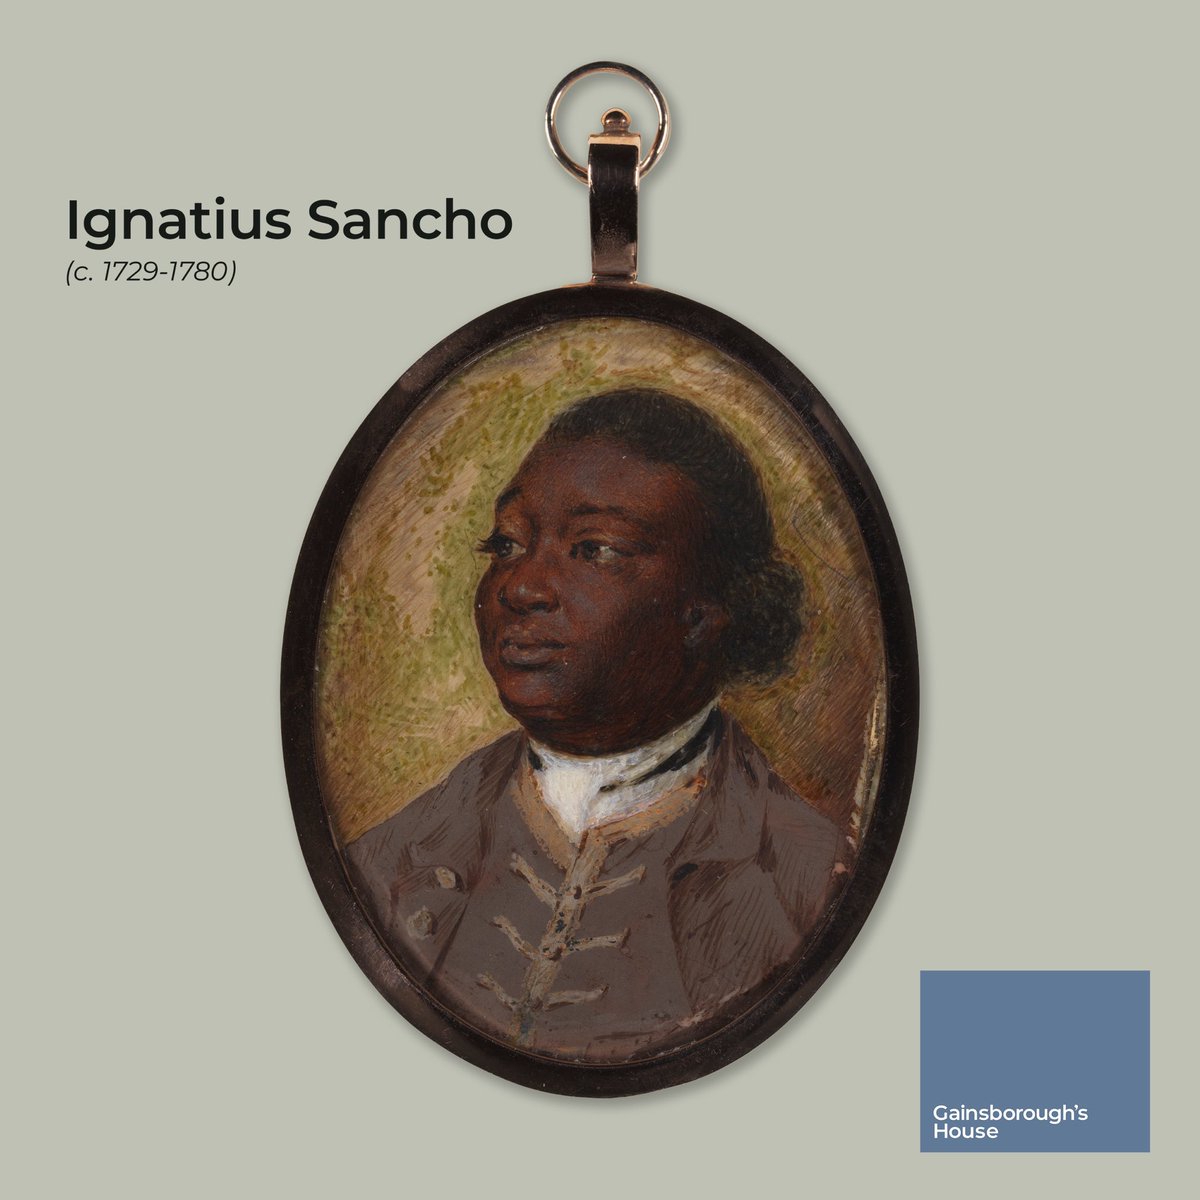 The 'Ignatius Sancho: A Portrait' exhibition explores Sancho’s wider connection with the local Suffolk area among other interesting and pivotal aspects of his life.
 
#IgnatiusSancho #BlackBritishHistory #NationalPortraitGallery #SuffolkHistory #ThomasGainsborough